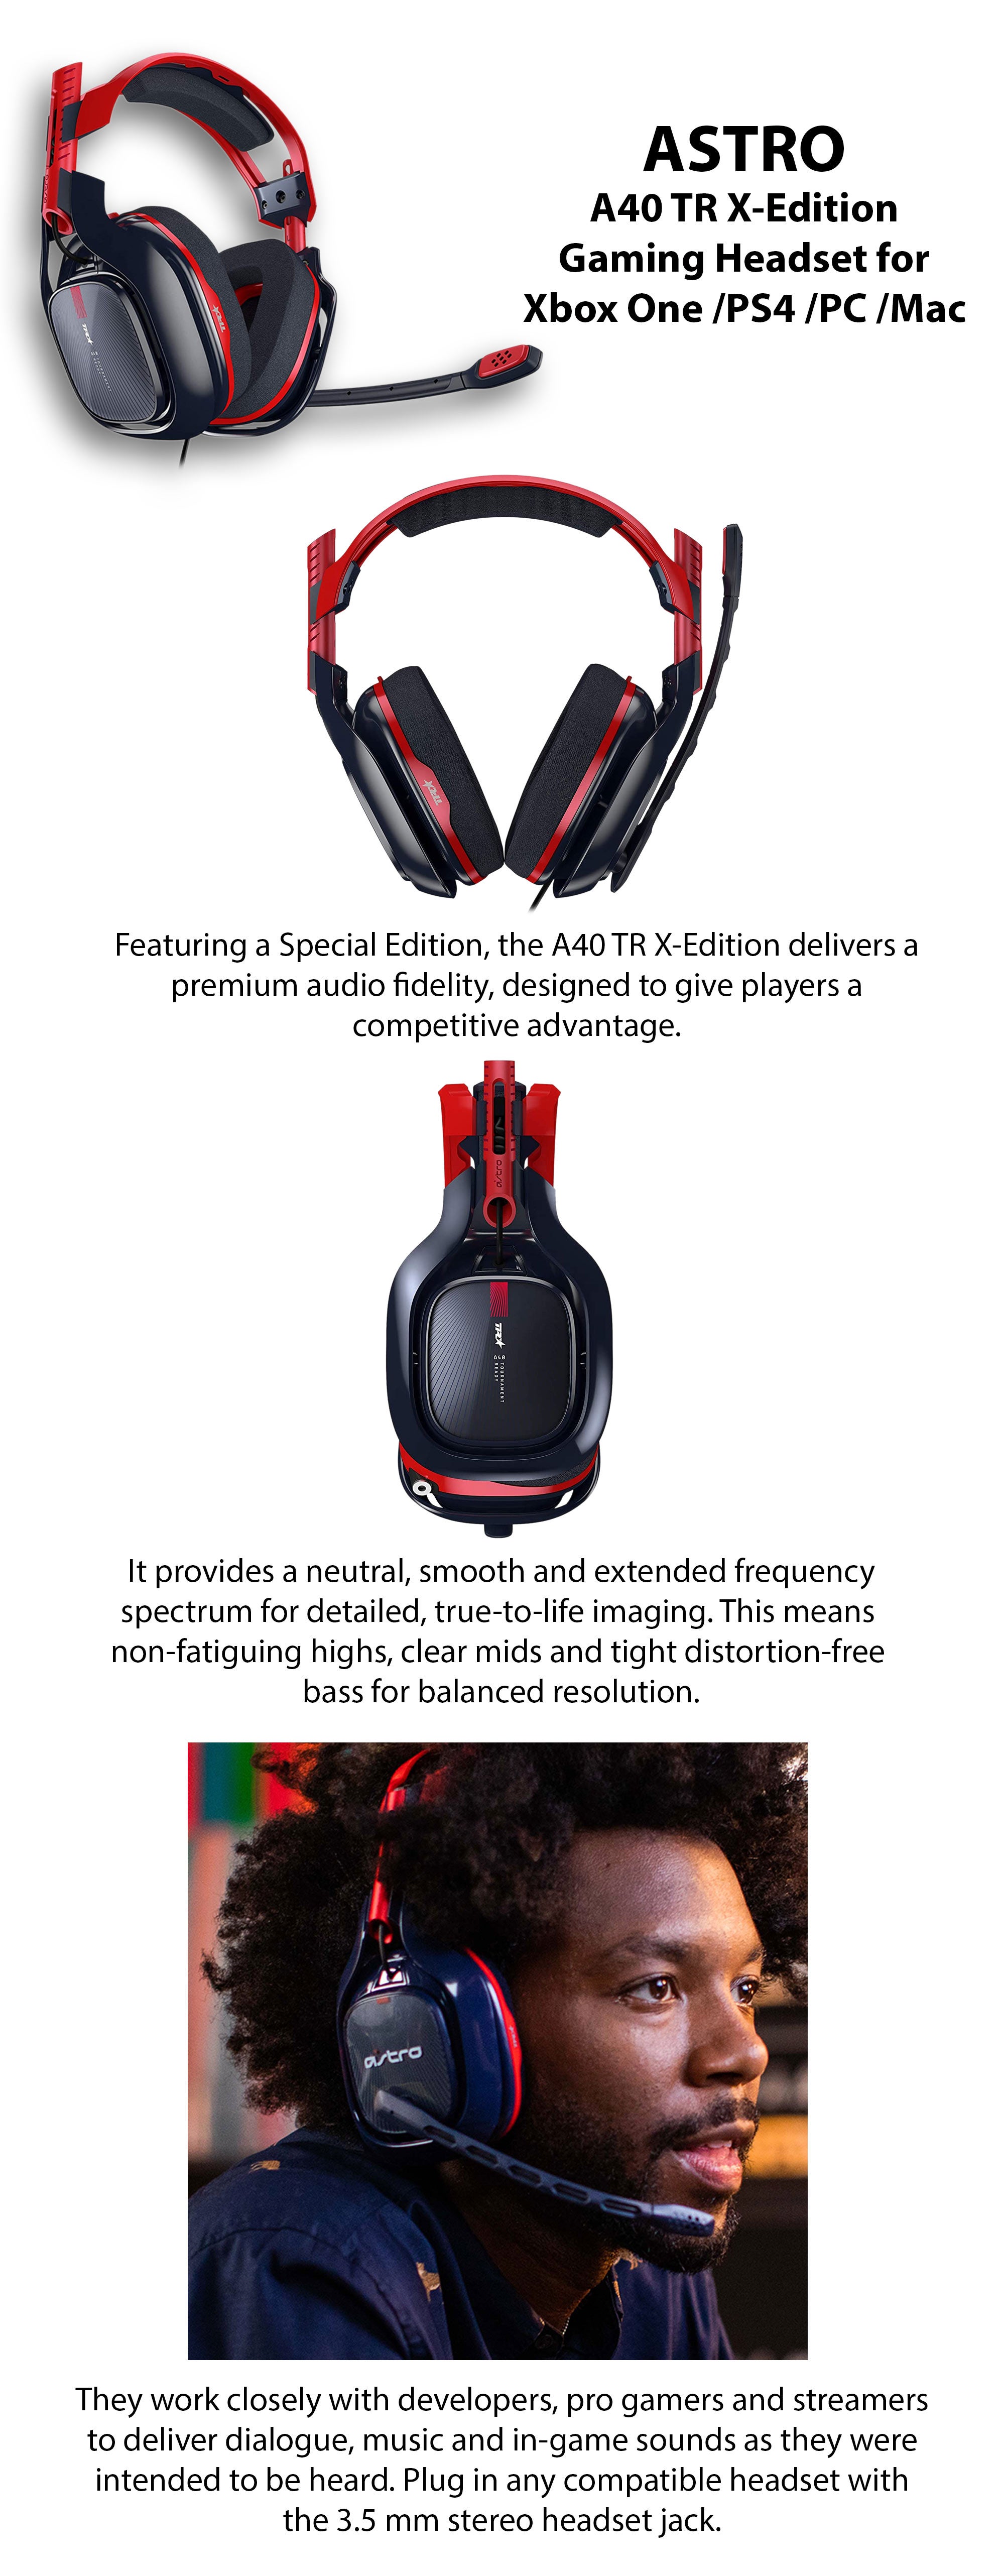 Shop Astro Gaming Headset 0 Tr X Edition For Xbox One Ps4 Pc Mac Black Red Online In Dubai Abu Dhabi And All Uae